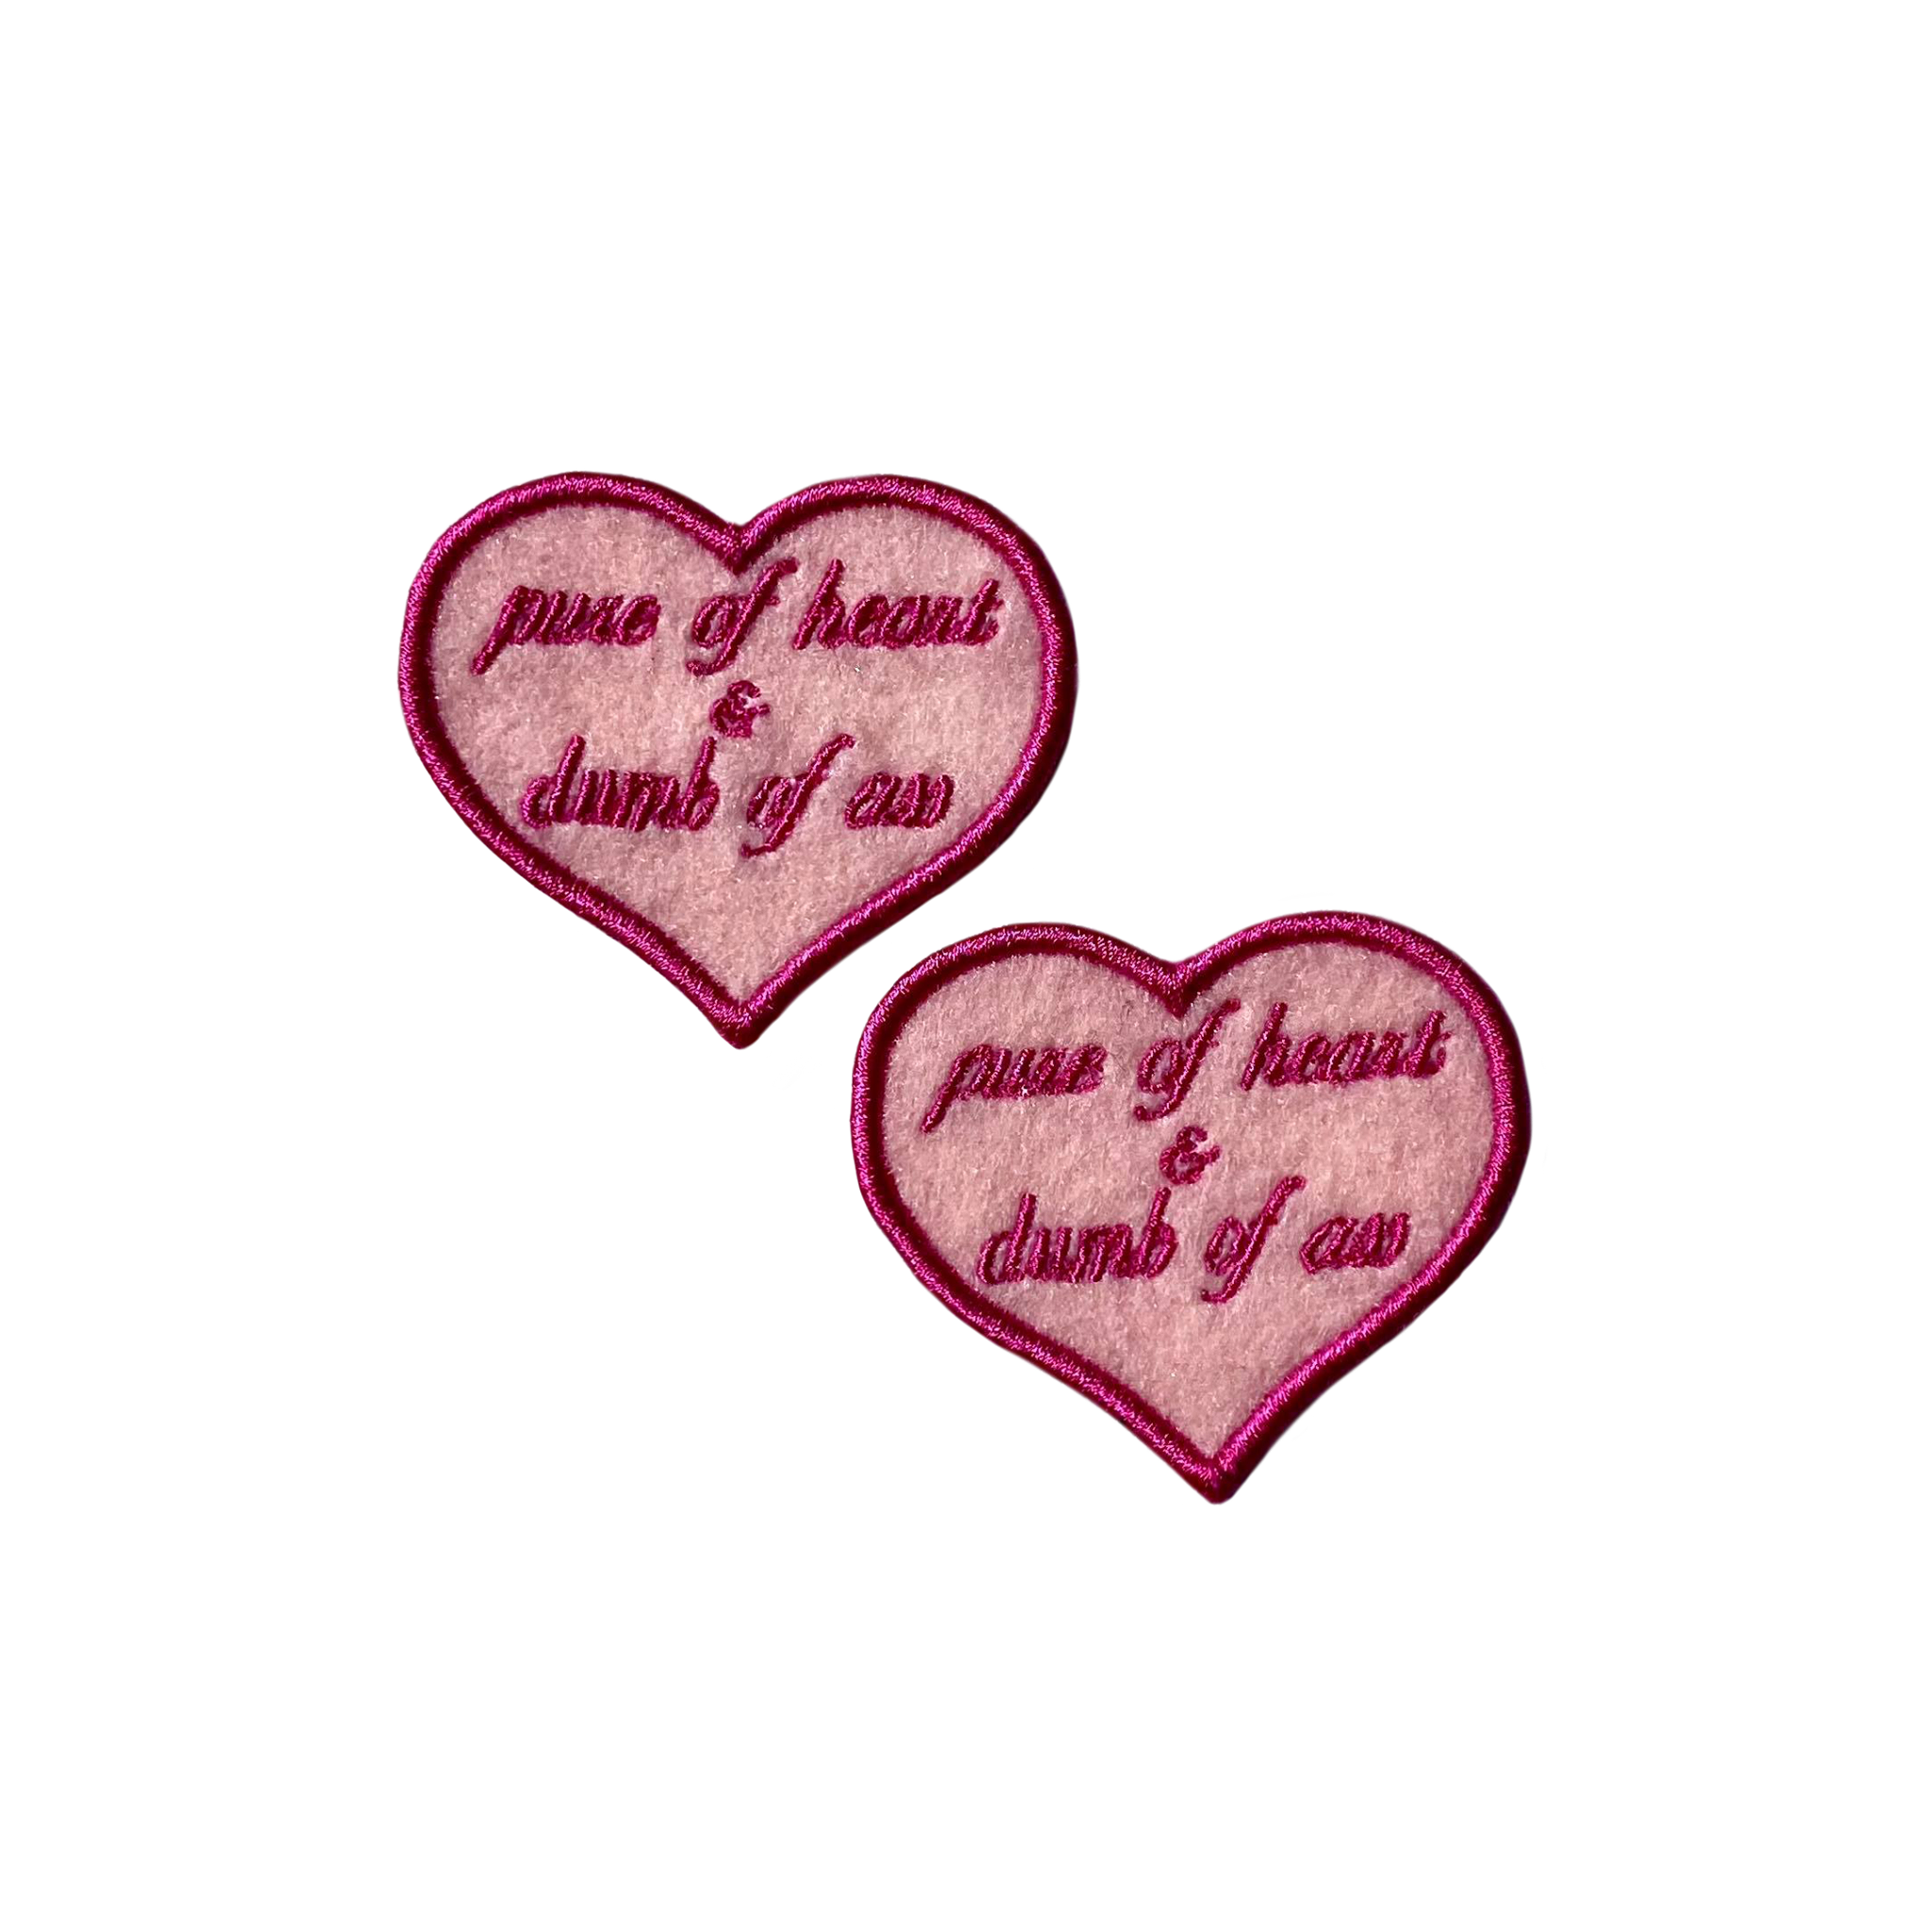 Pure of Heart & Dumb of Ass Embroidered Iron-on Patch - IncredibleGood Inc